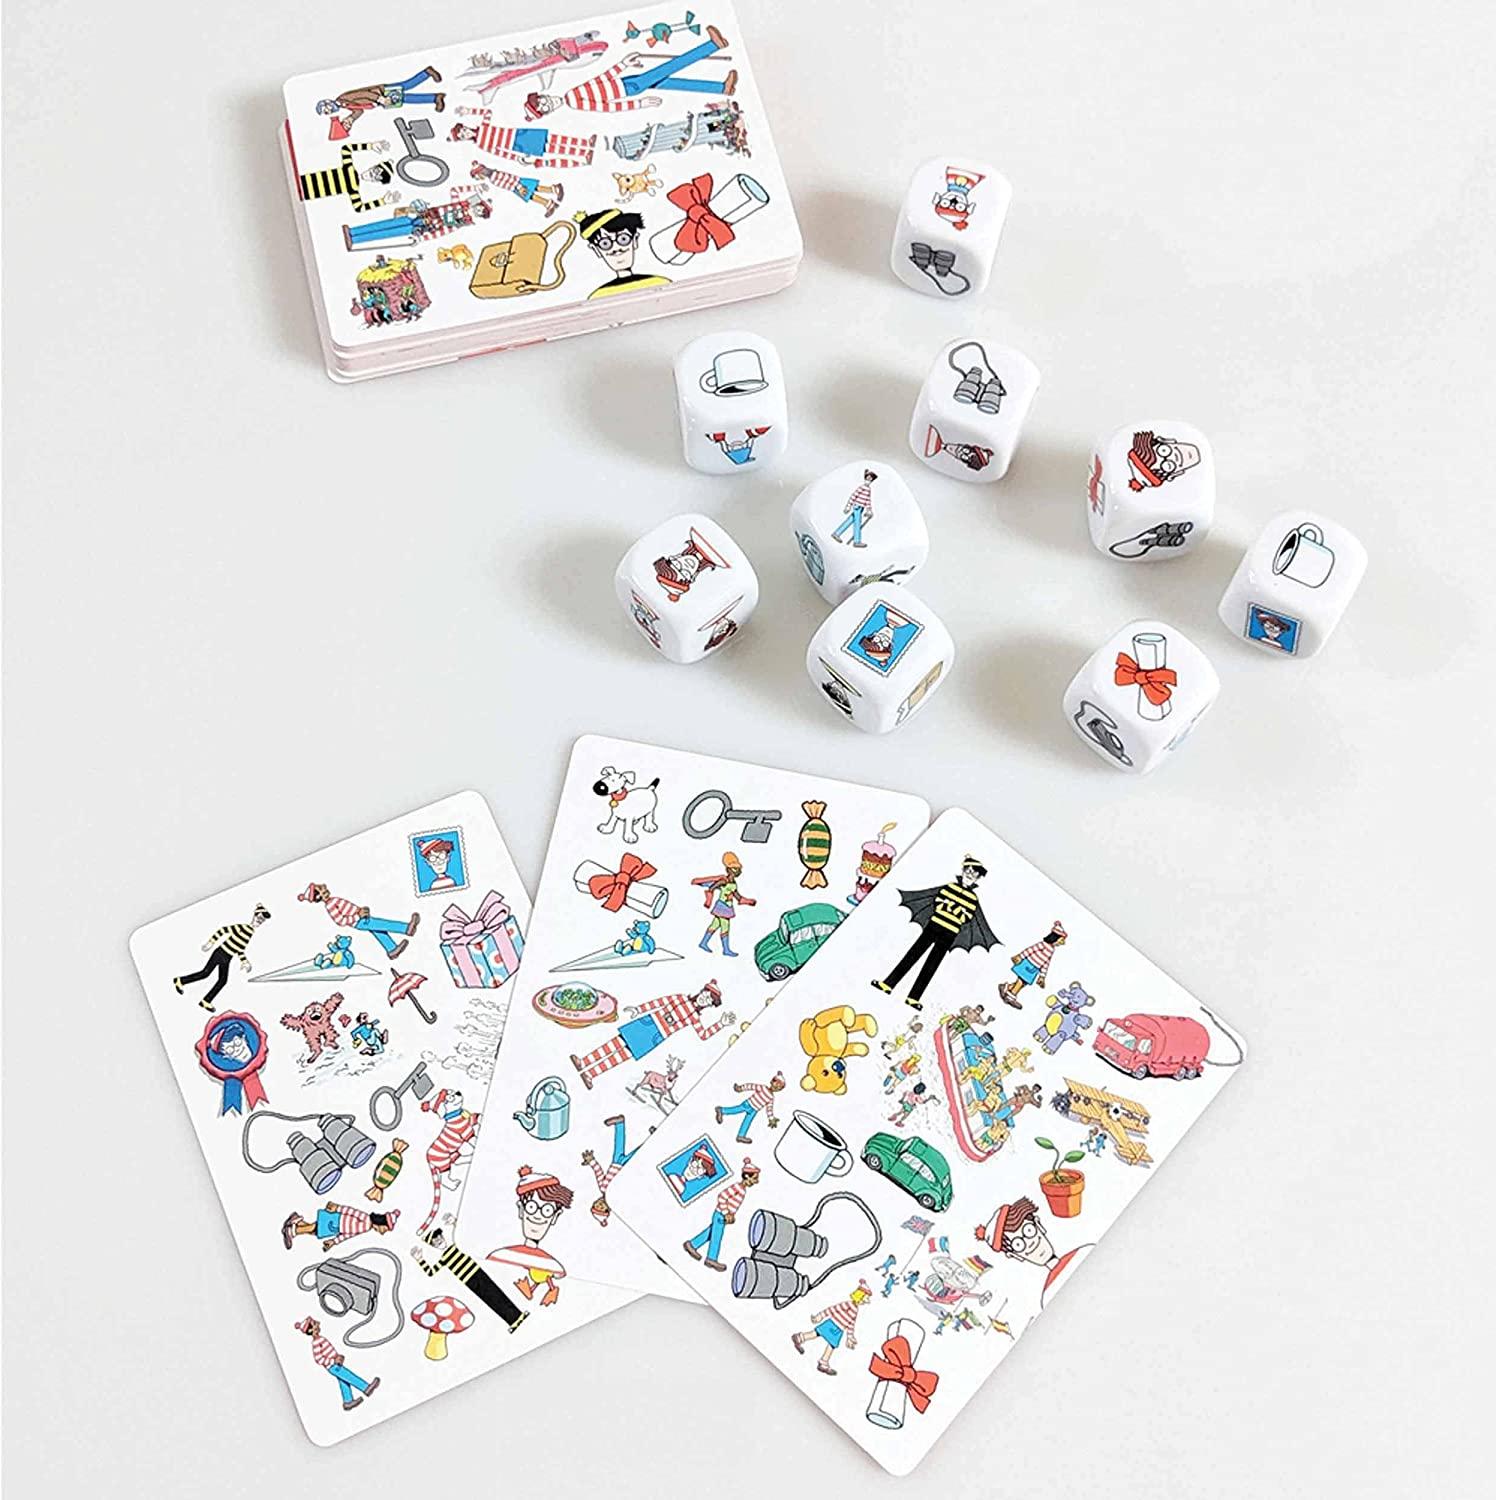 Image showing the pieces that make up the Where's Wally Find it Fast Game - a stack of cards with multiple images and Where's Wally characters and 9 dice with a different character / item on each side.